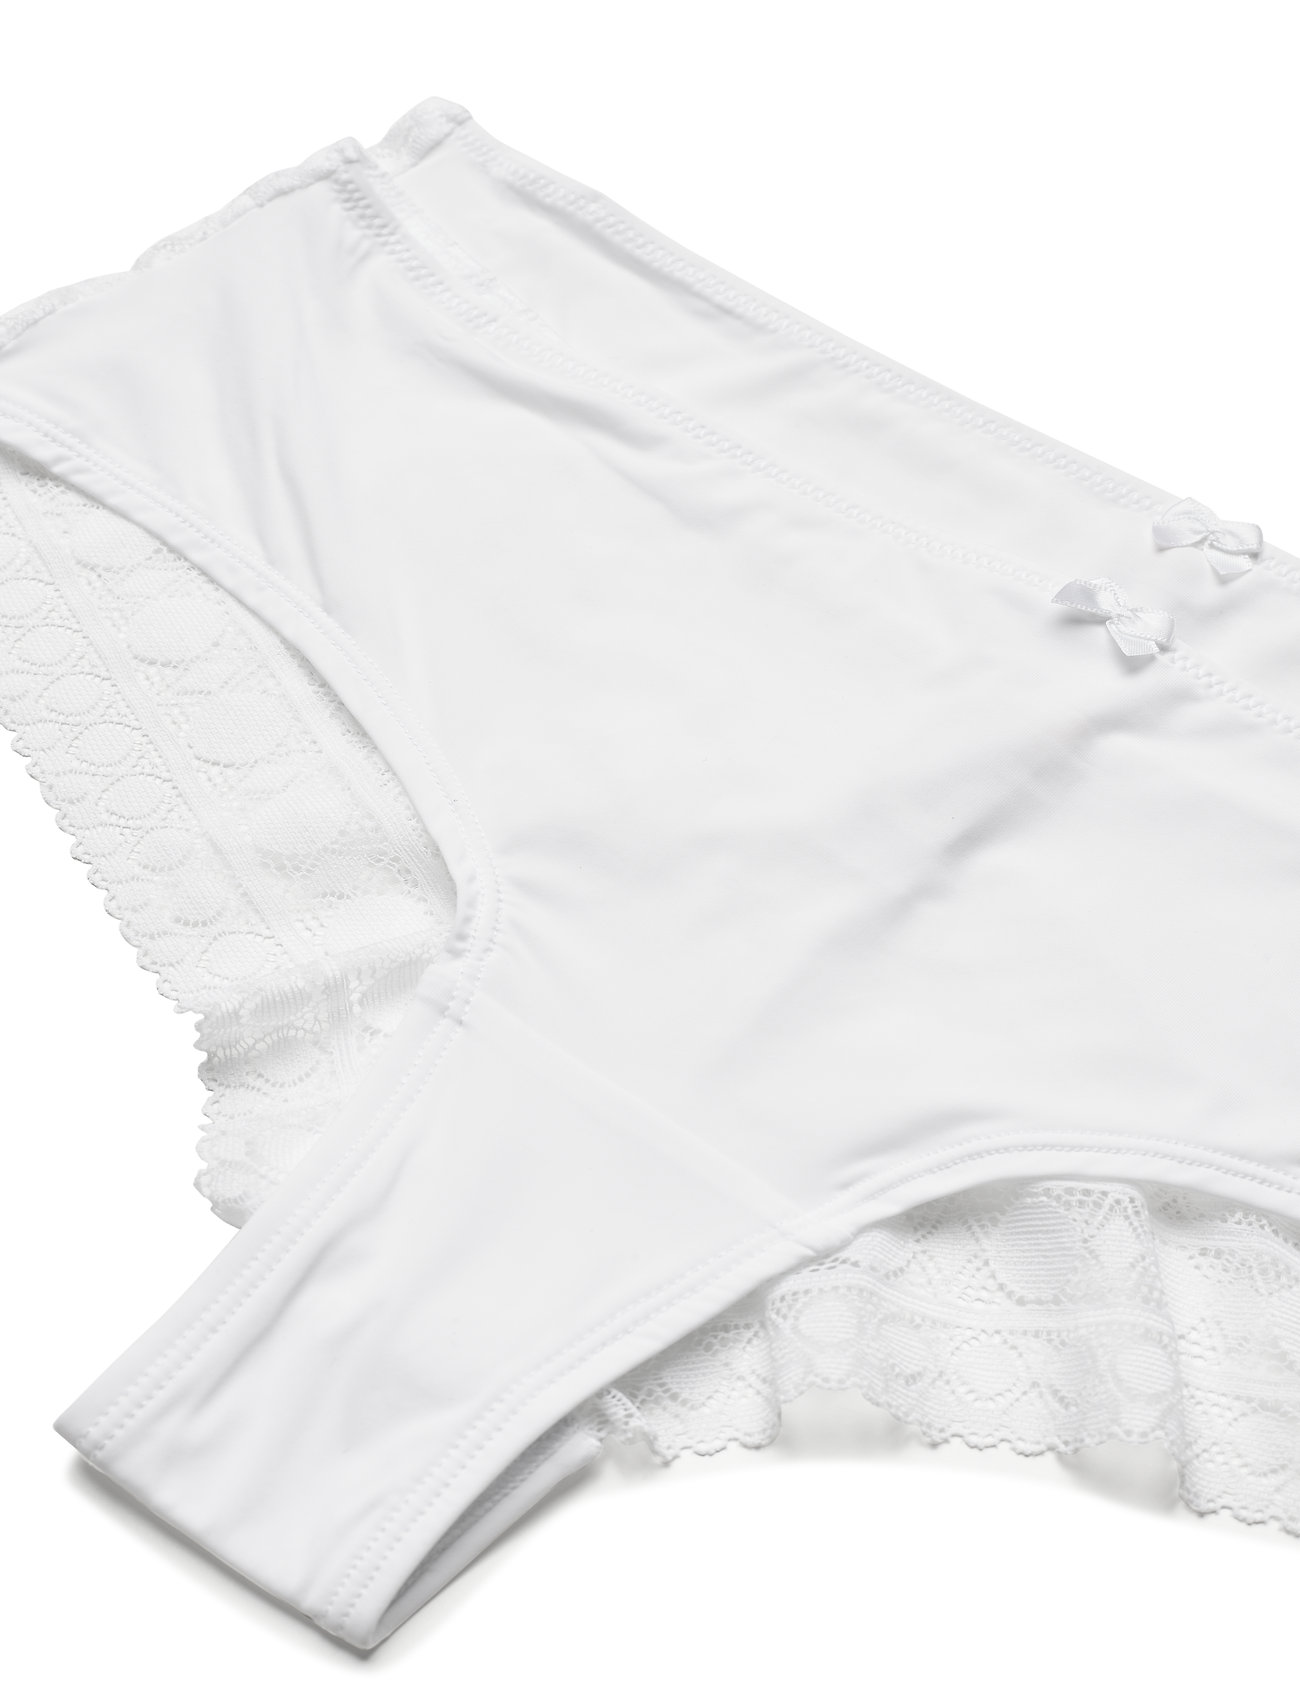 Esprit Bodywear Women - Double pack: Brazilian hipster shorts trimmed with lace - alhaisimmat hinnat - white - 1